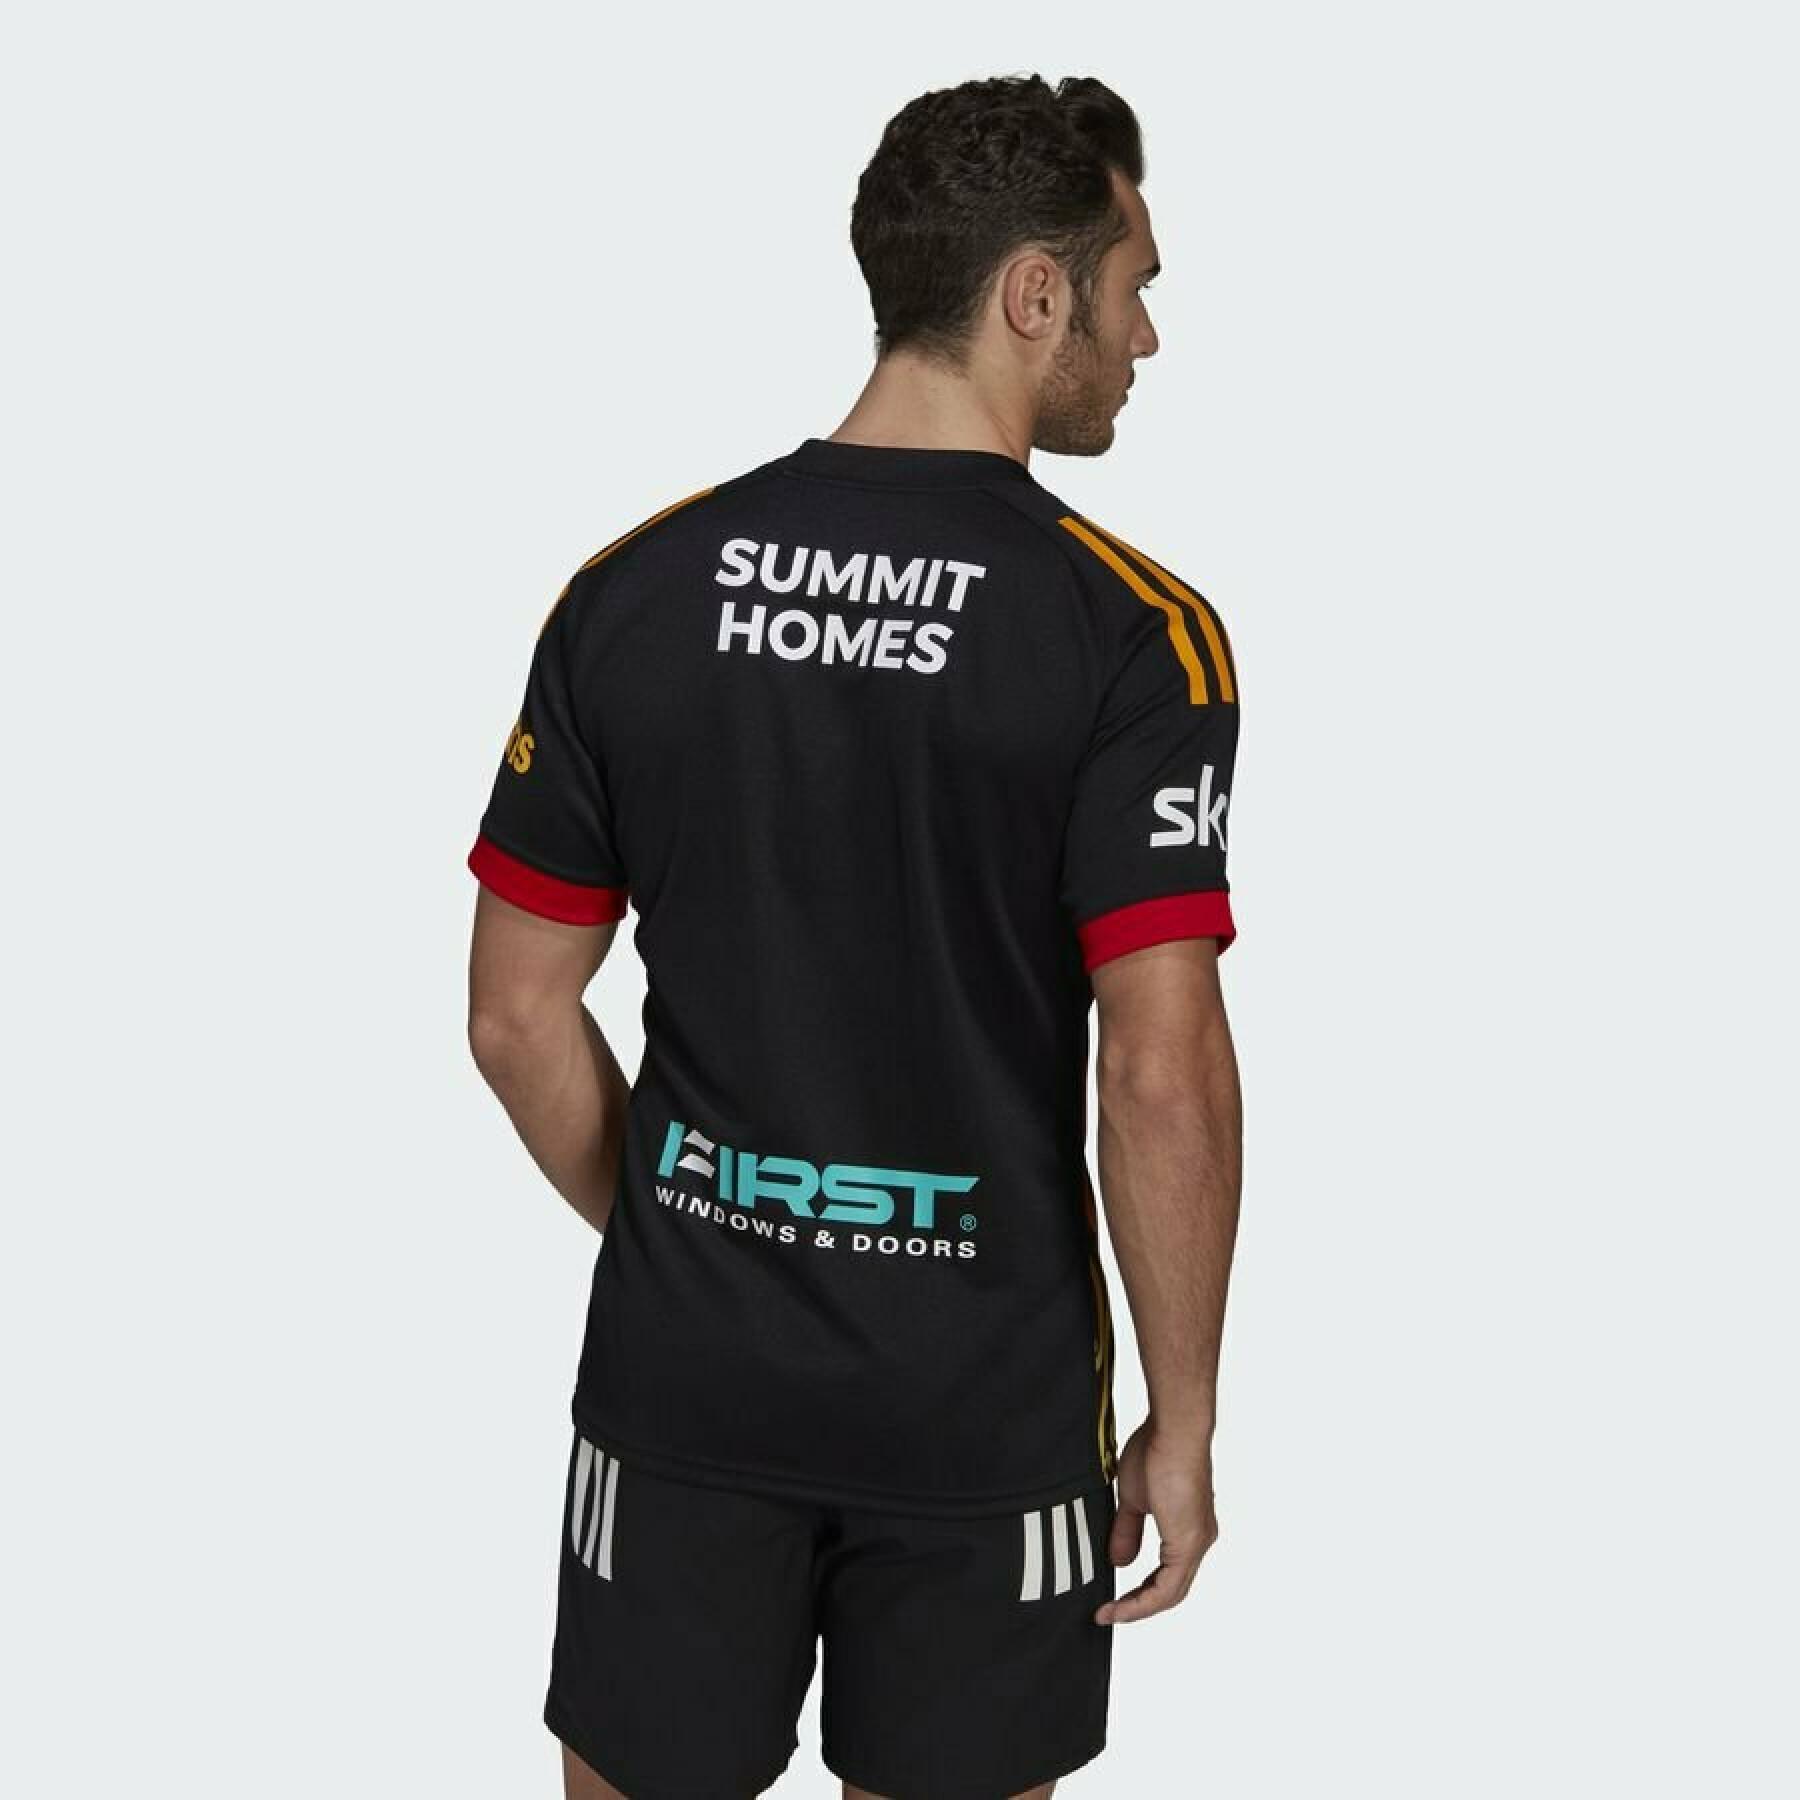 Home jersey Chiefs Rugby Replica 2021/22